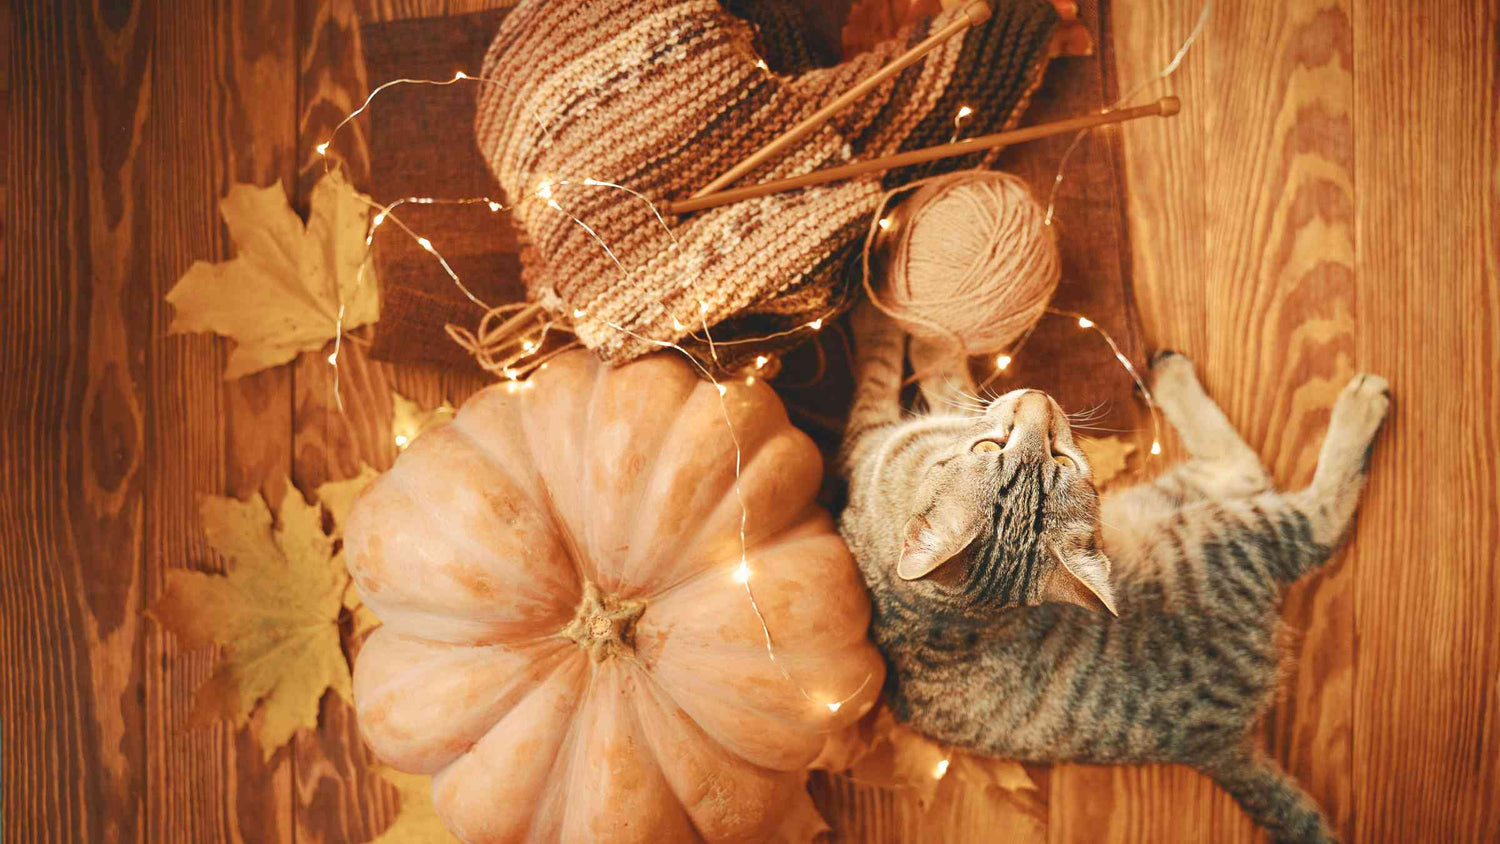 8 Reasons to be thankful for the cats in your life - grey tabby cat laying next to fall decor like pumpkins, leaves, and lights